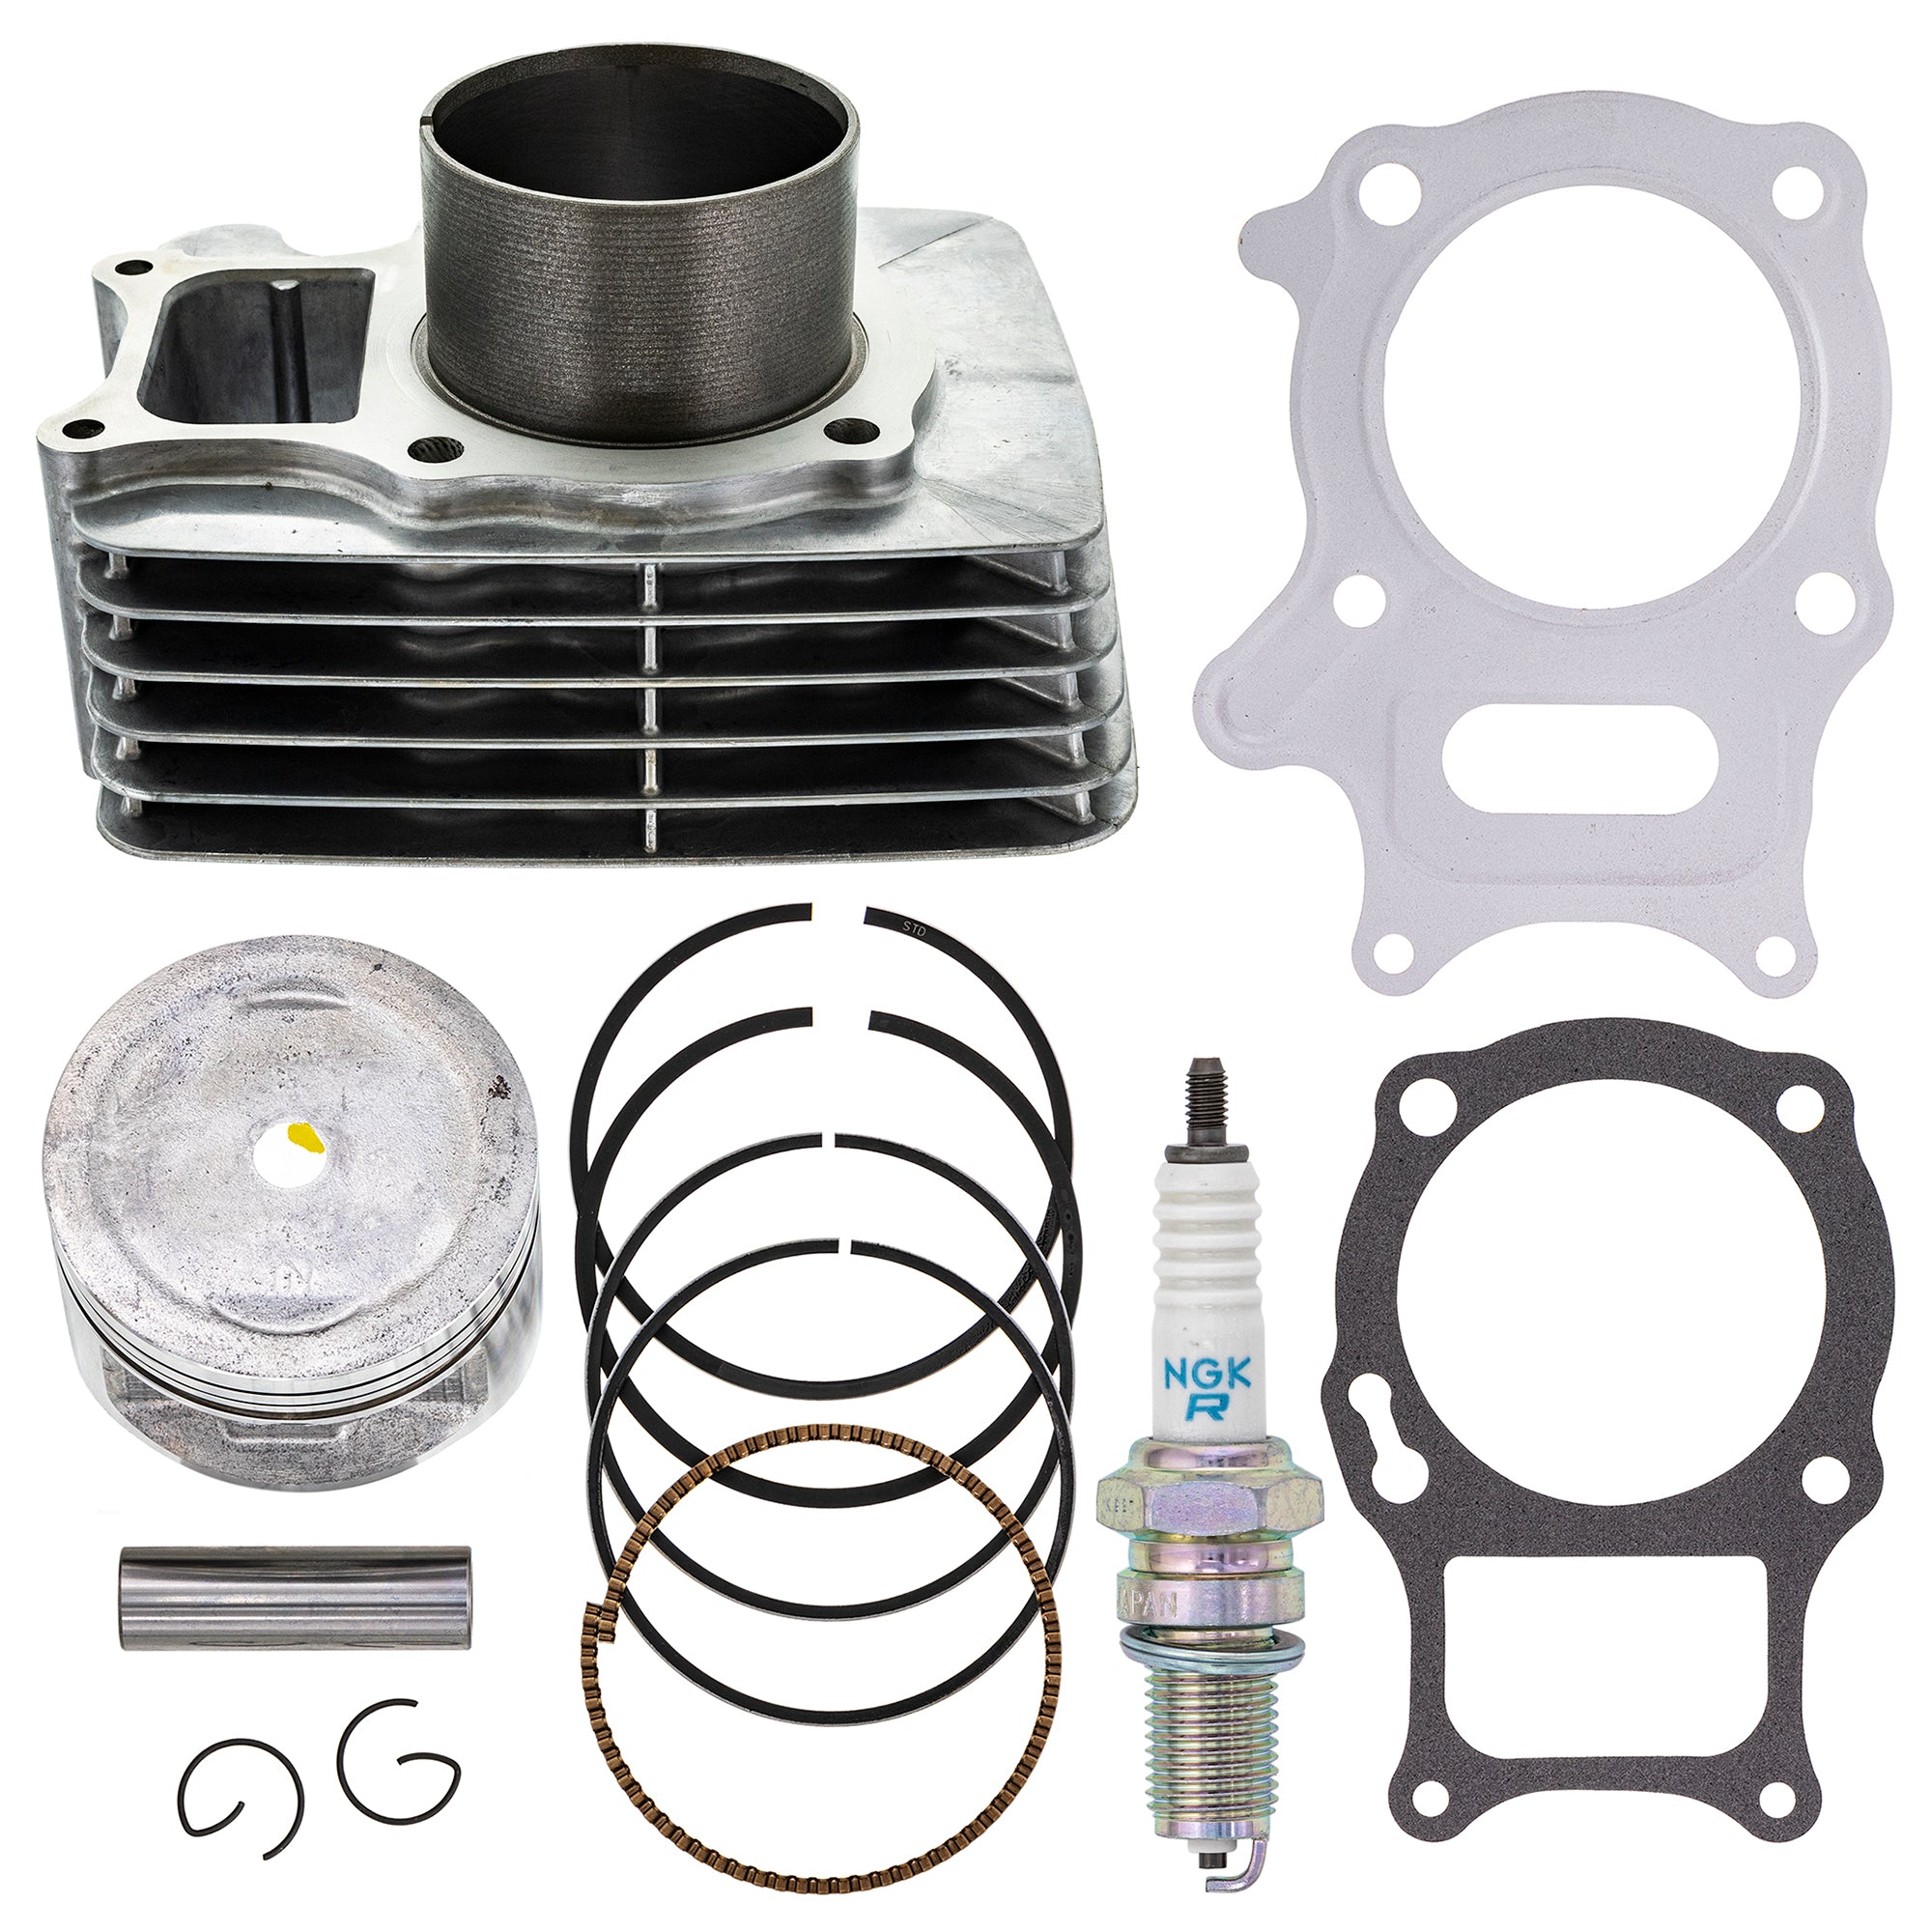 Top End Kit Cylinder Piston Gasket for zOTHER Honda TRX250 SporTrax Recon 13111-HB5-000 NICHE MK1003415